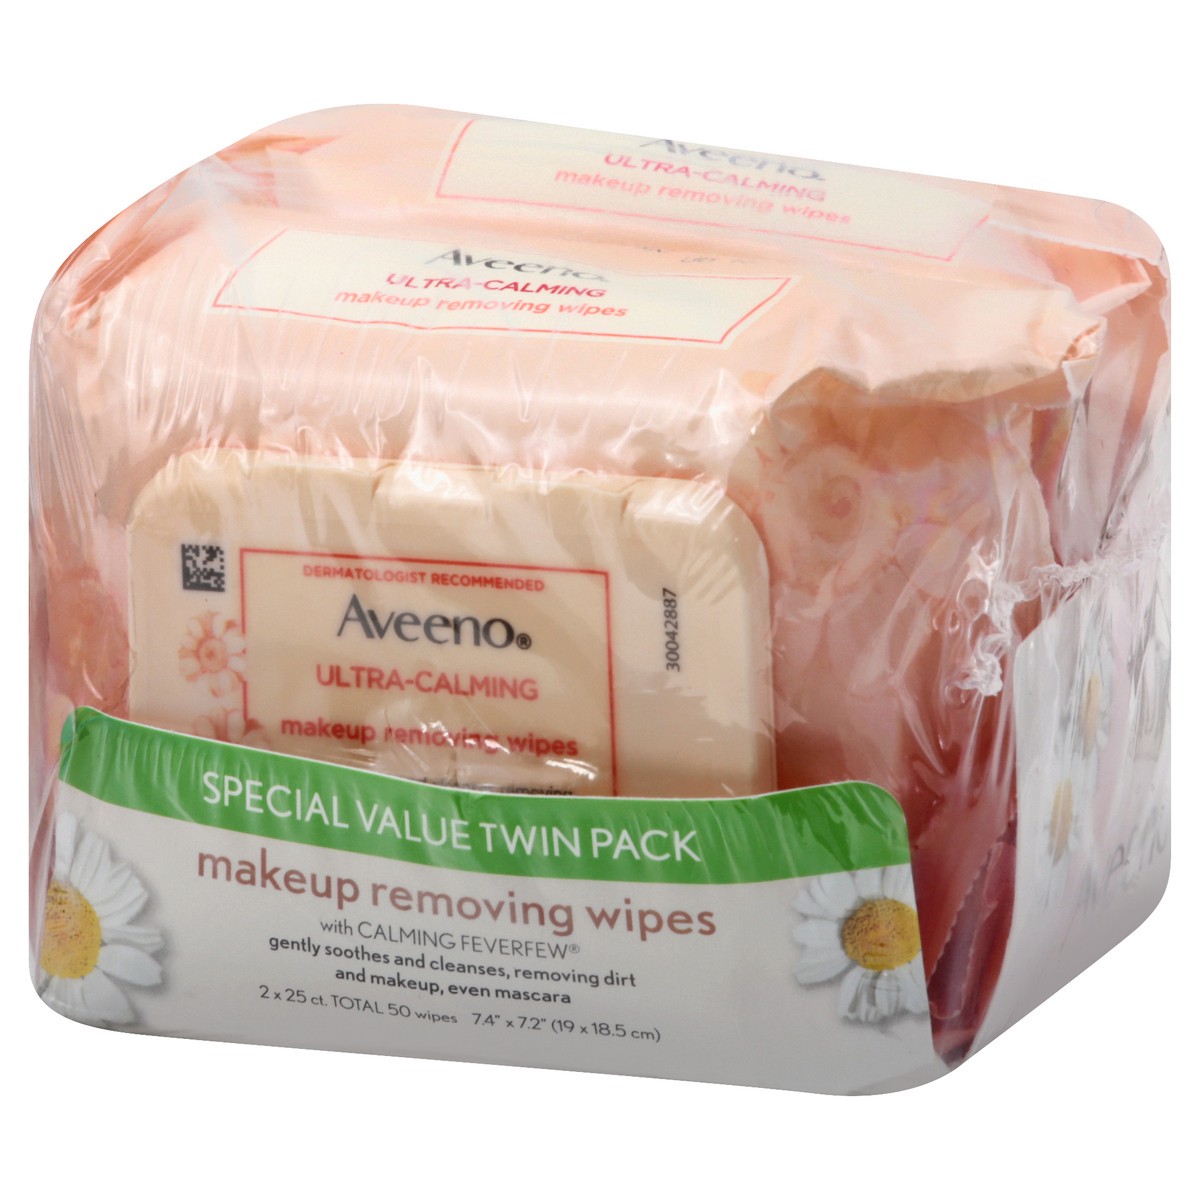 slide 3 of 9, Aveeno Ultra-Calming Makeup Removing Facial Cleansing Wipes with Calming Feverfew Extract, Oil-Free Soothing Face Wipes for Sensitive Skin, Gentle & Non-Comedogenic, Twin Pack, 2 x 25 ct, 50 ct